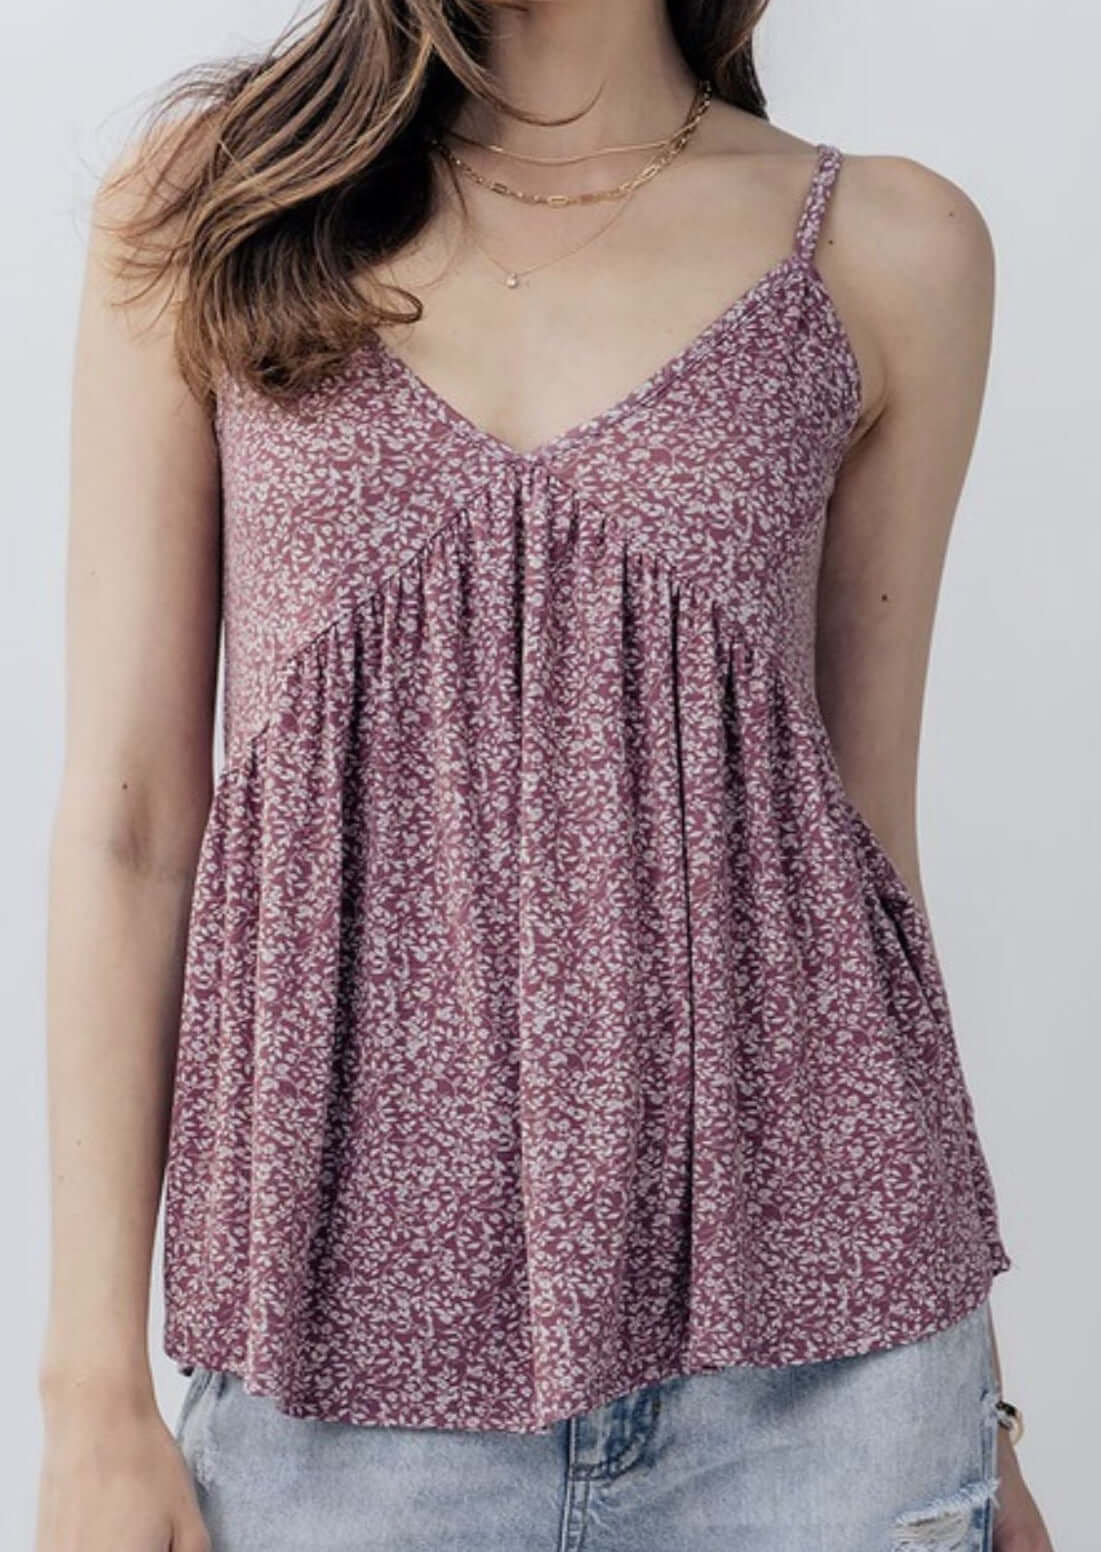 Rosewood Ditsy Floral V-Neck Baby Doll Tank | Made in USA | V-Neck, Spaghetti Straps, Baby Doll Design, Soft Material | Classy Cozy Cool Ladies Boutique